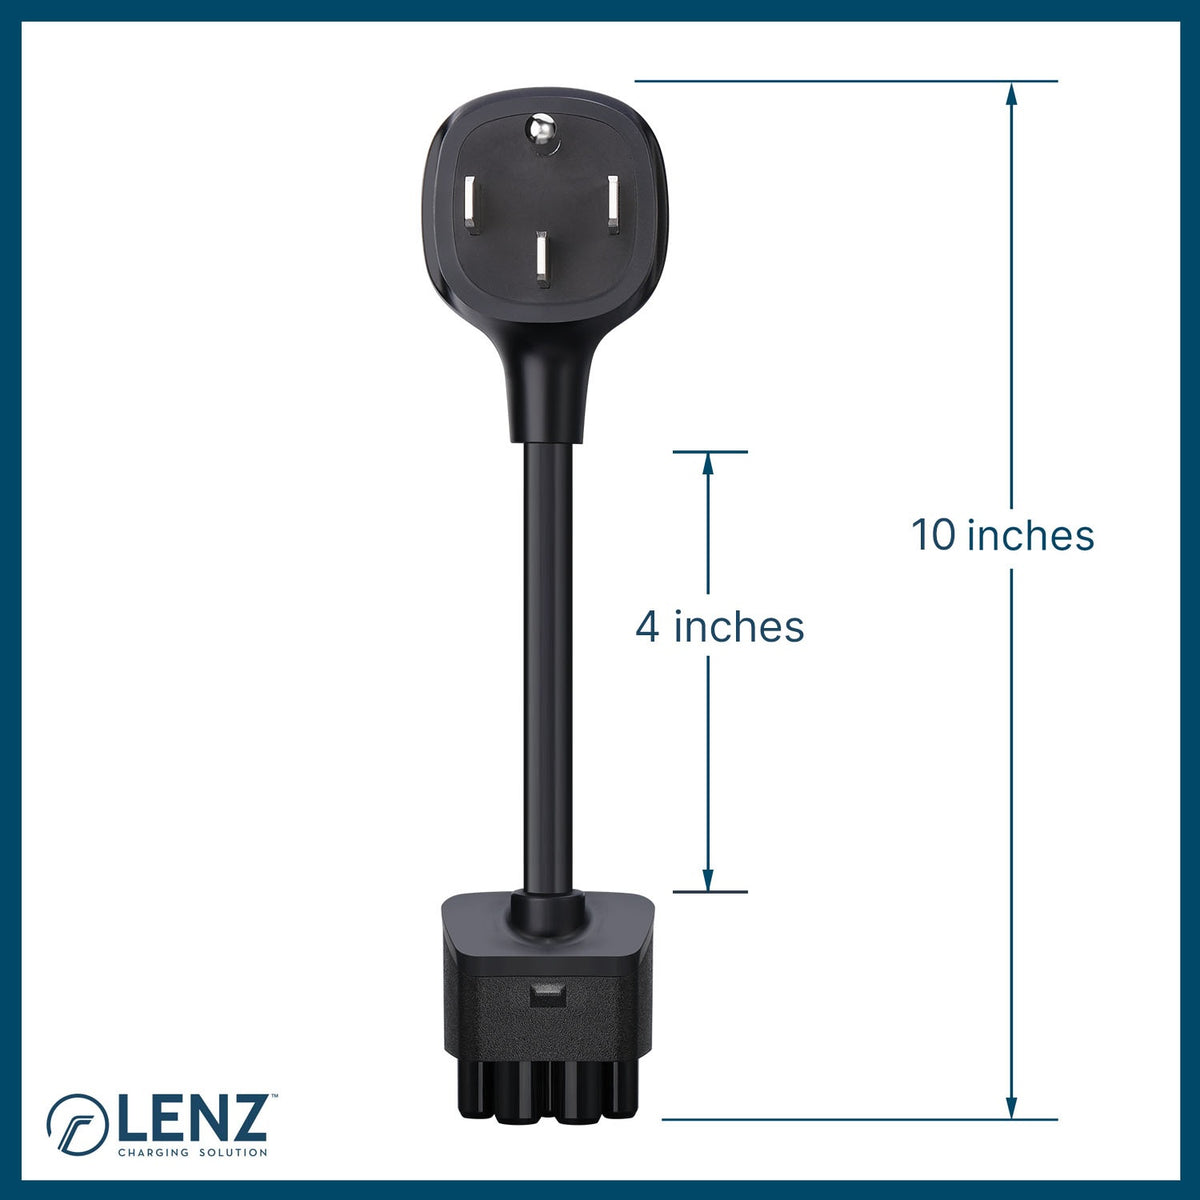 LENZ NEMA 14-50 Adapter for Tesla Gen 2 Mobile Connector Measures 10 inches end-to-end. A longer 16 inch extended version is available.